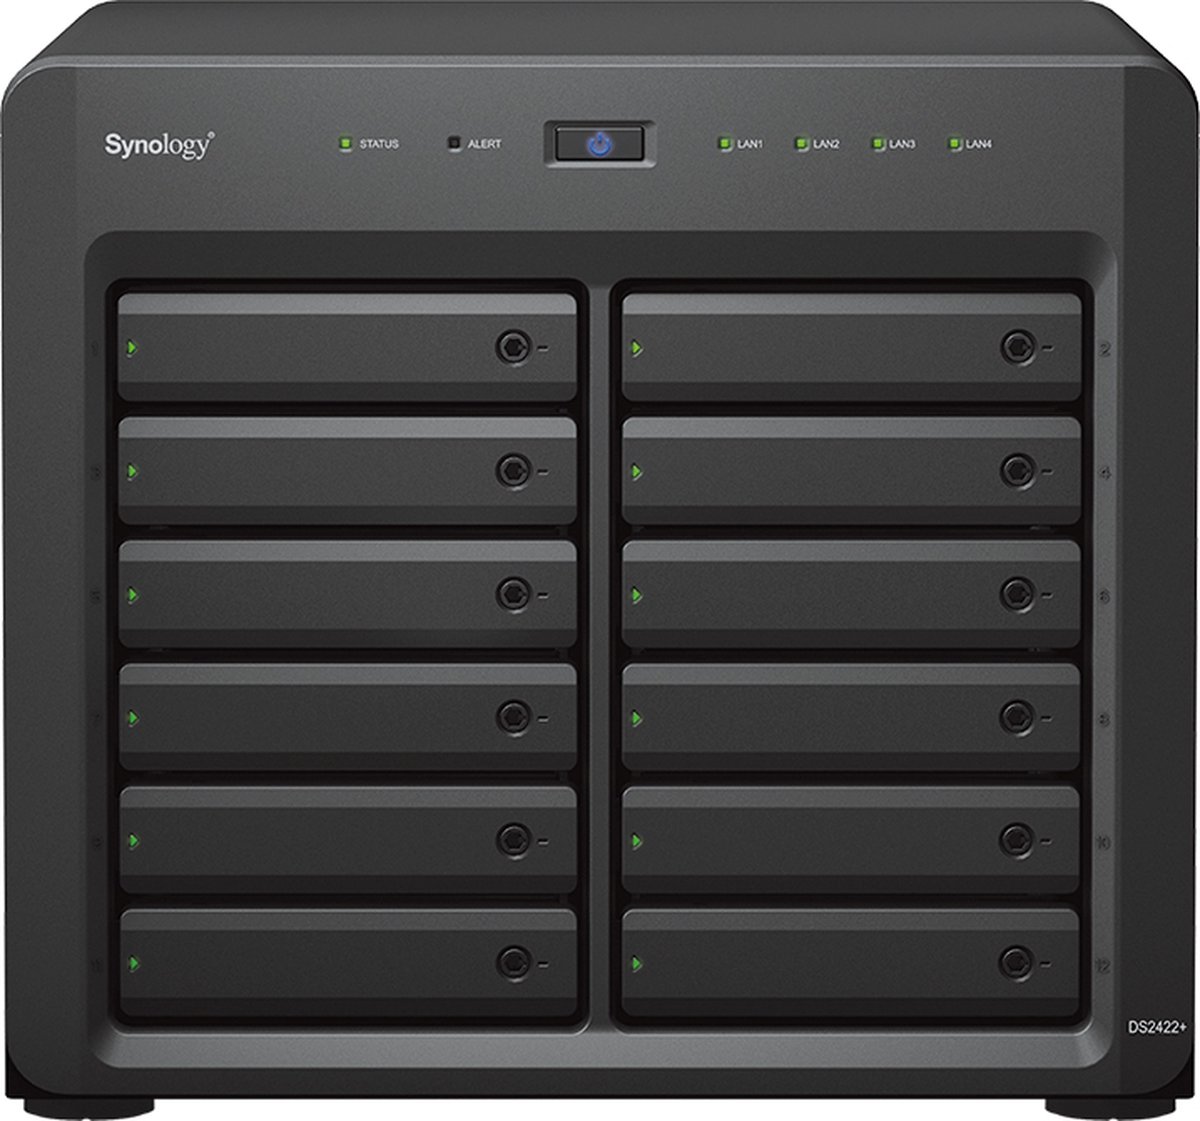 Synology Disk Station Ds2422+